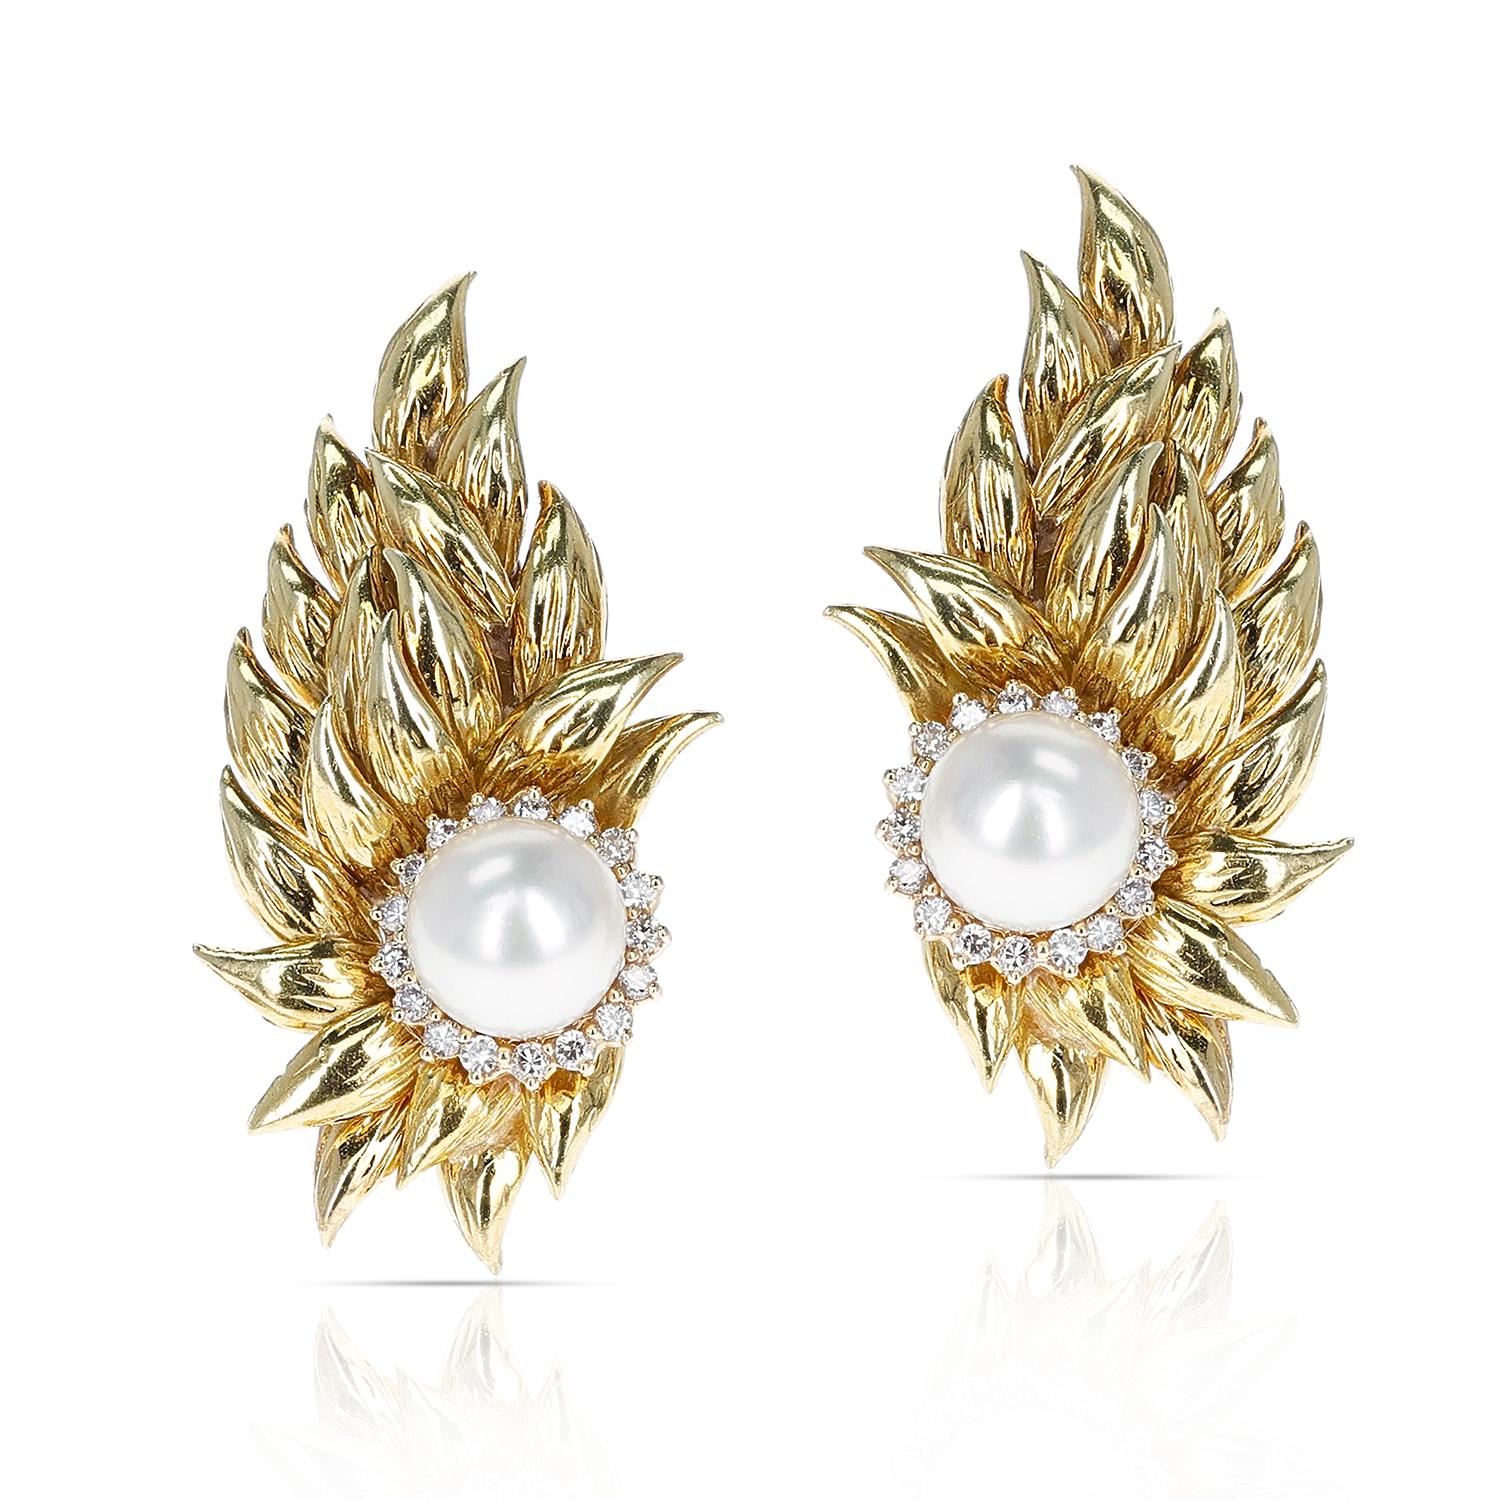 Cultured Pearl Earrings with a Diamond Halo in 18K Gold Leaf-Style Design In Excellent Condition For Sale In New York, NY